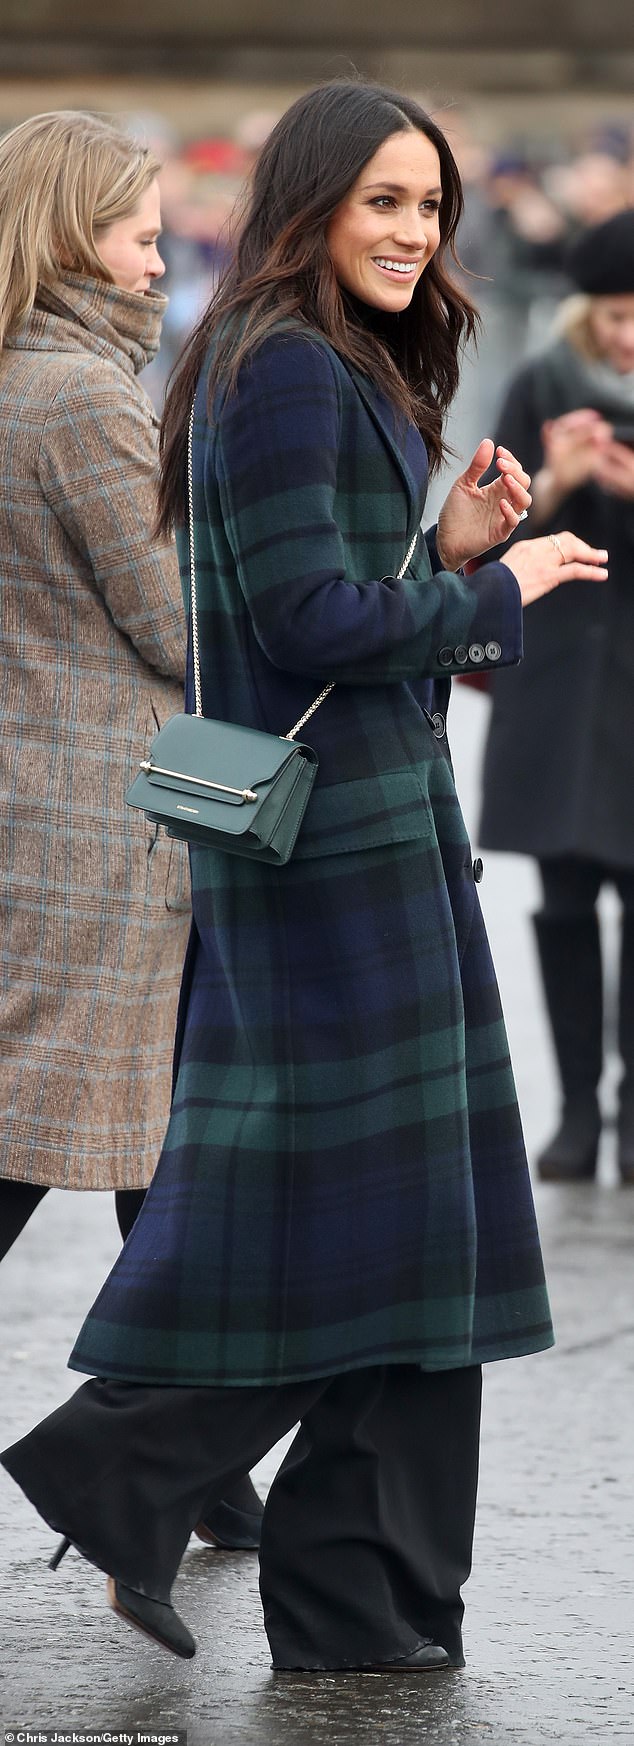 Dating back to 2019, Meghan wore long black trousers that dragged on the floor in Edinburgh